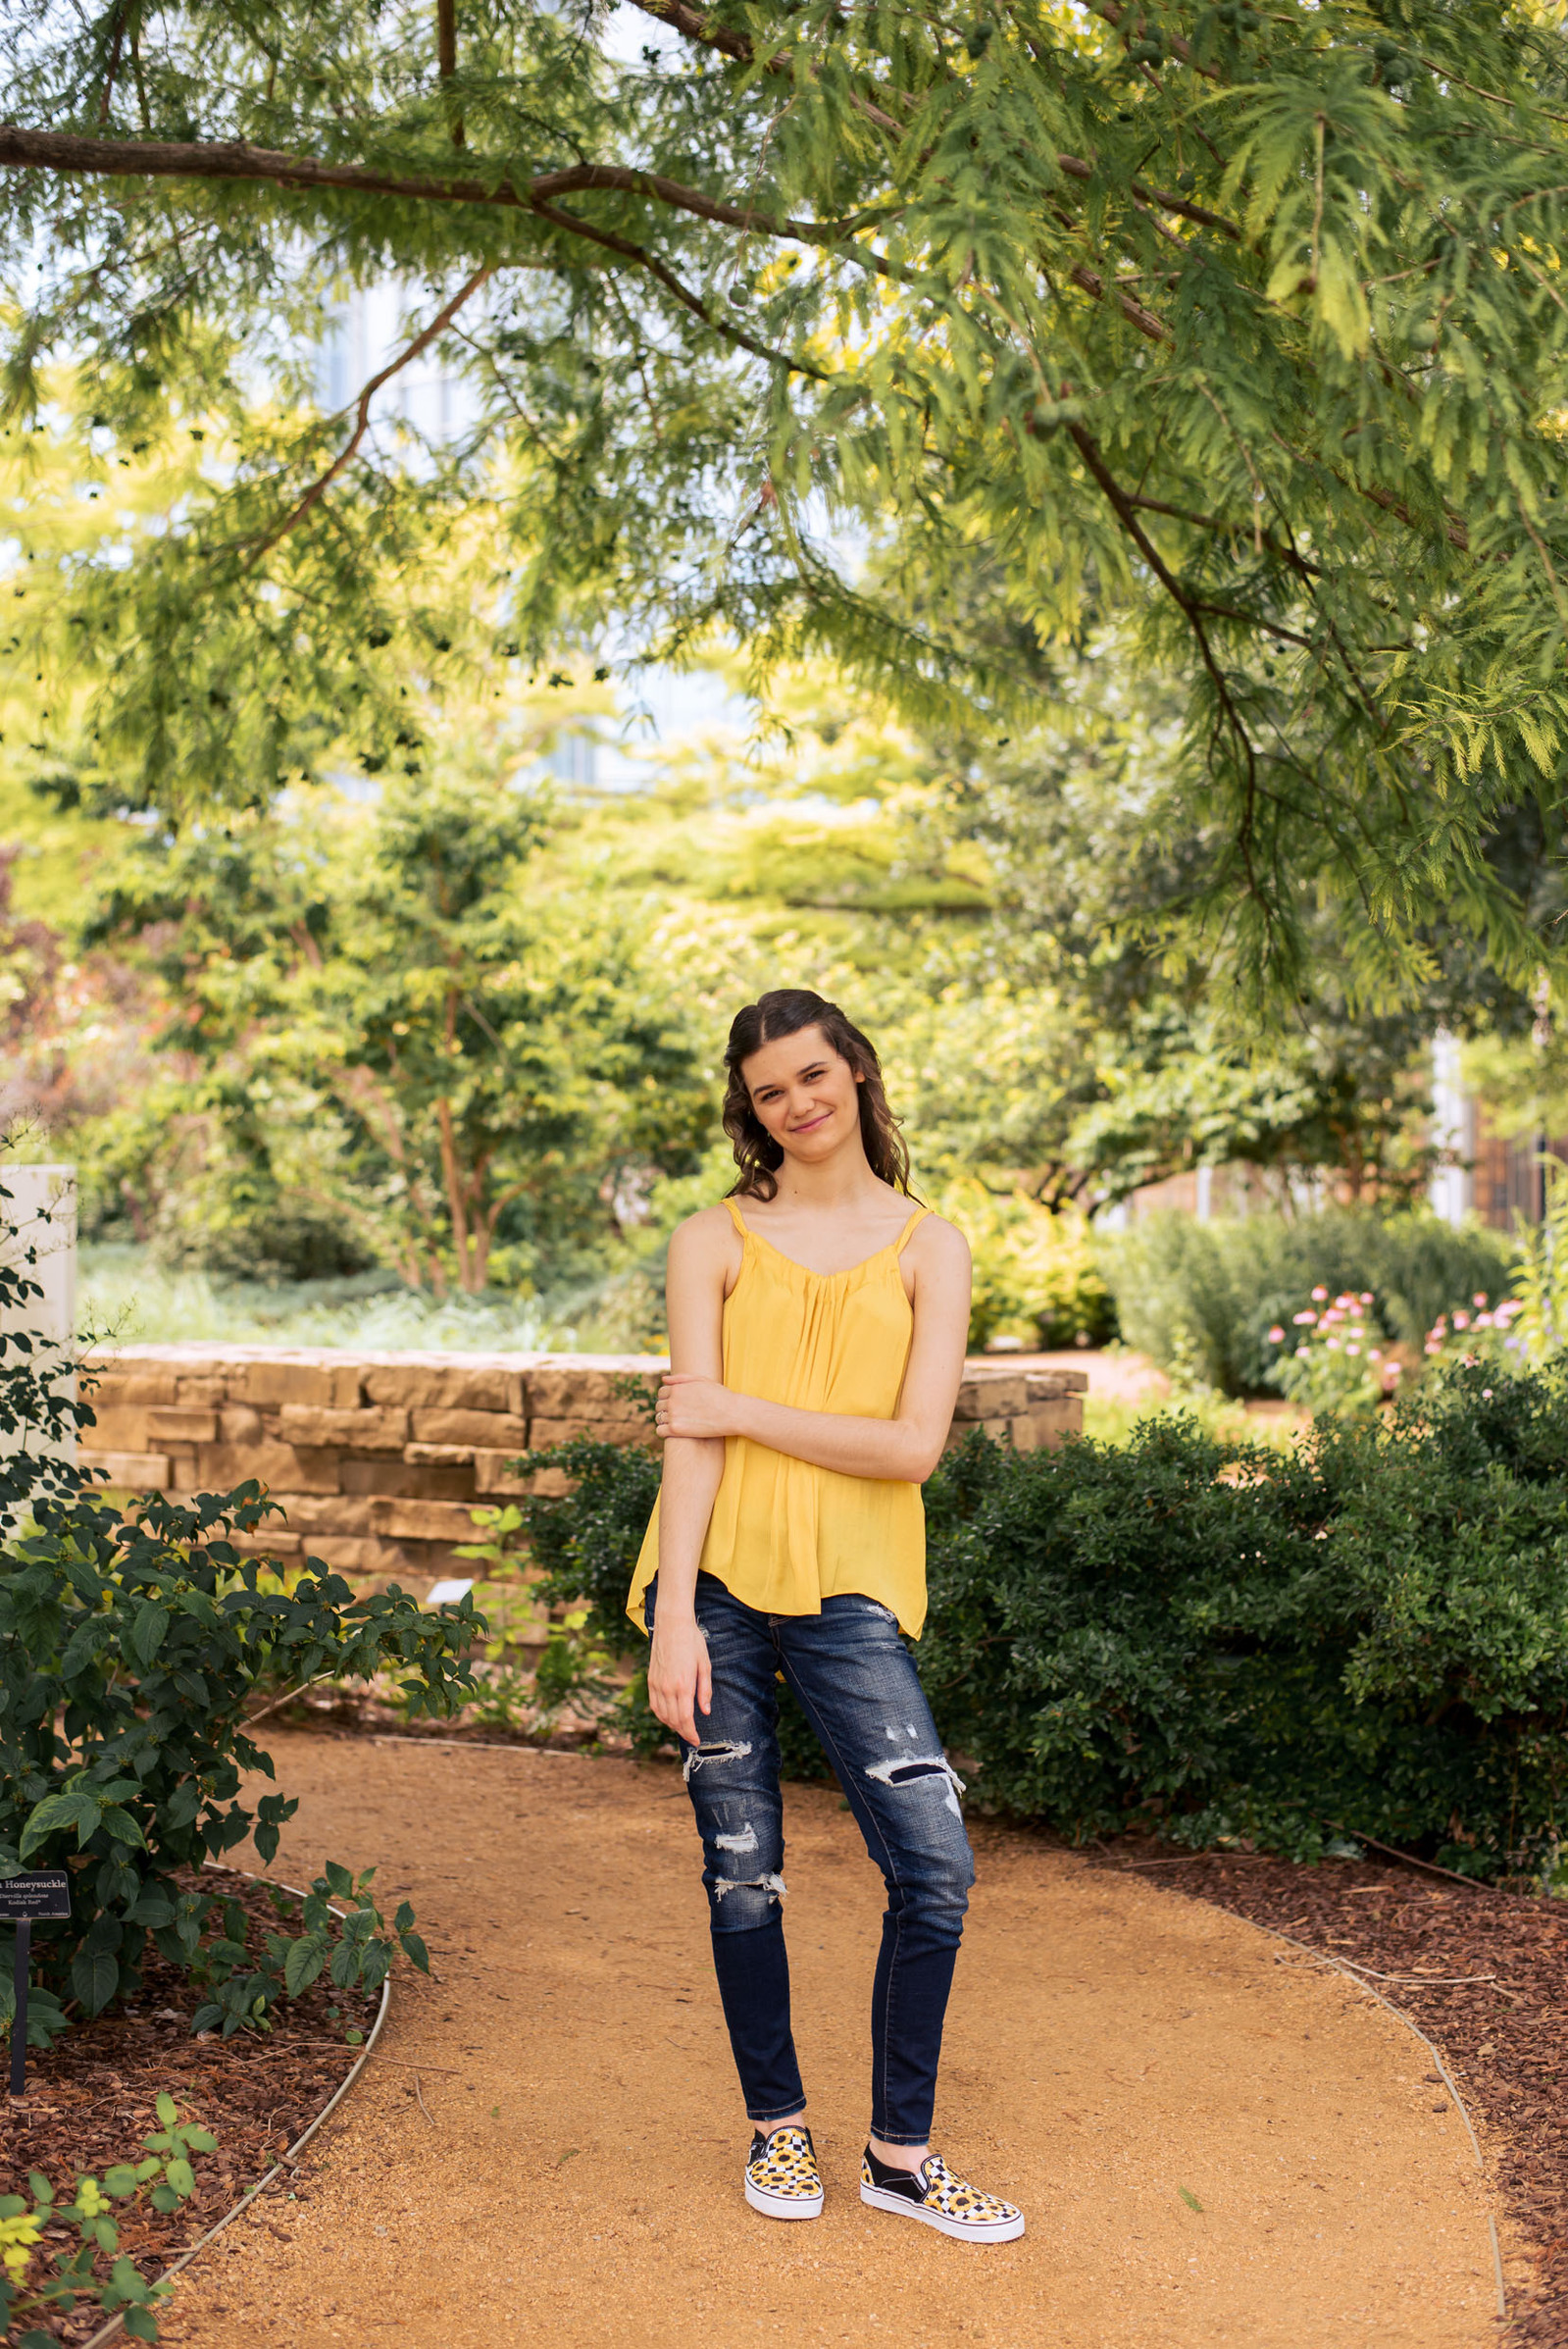 high school senior girl wearing a yellow flowy top and blue jeans with Vans stands on a path with green leaves around her at Myriad Gardens in Oklahoma City